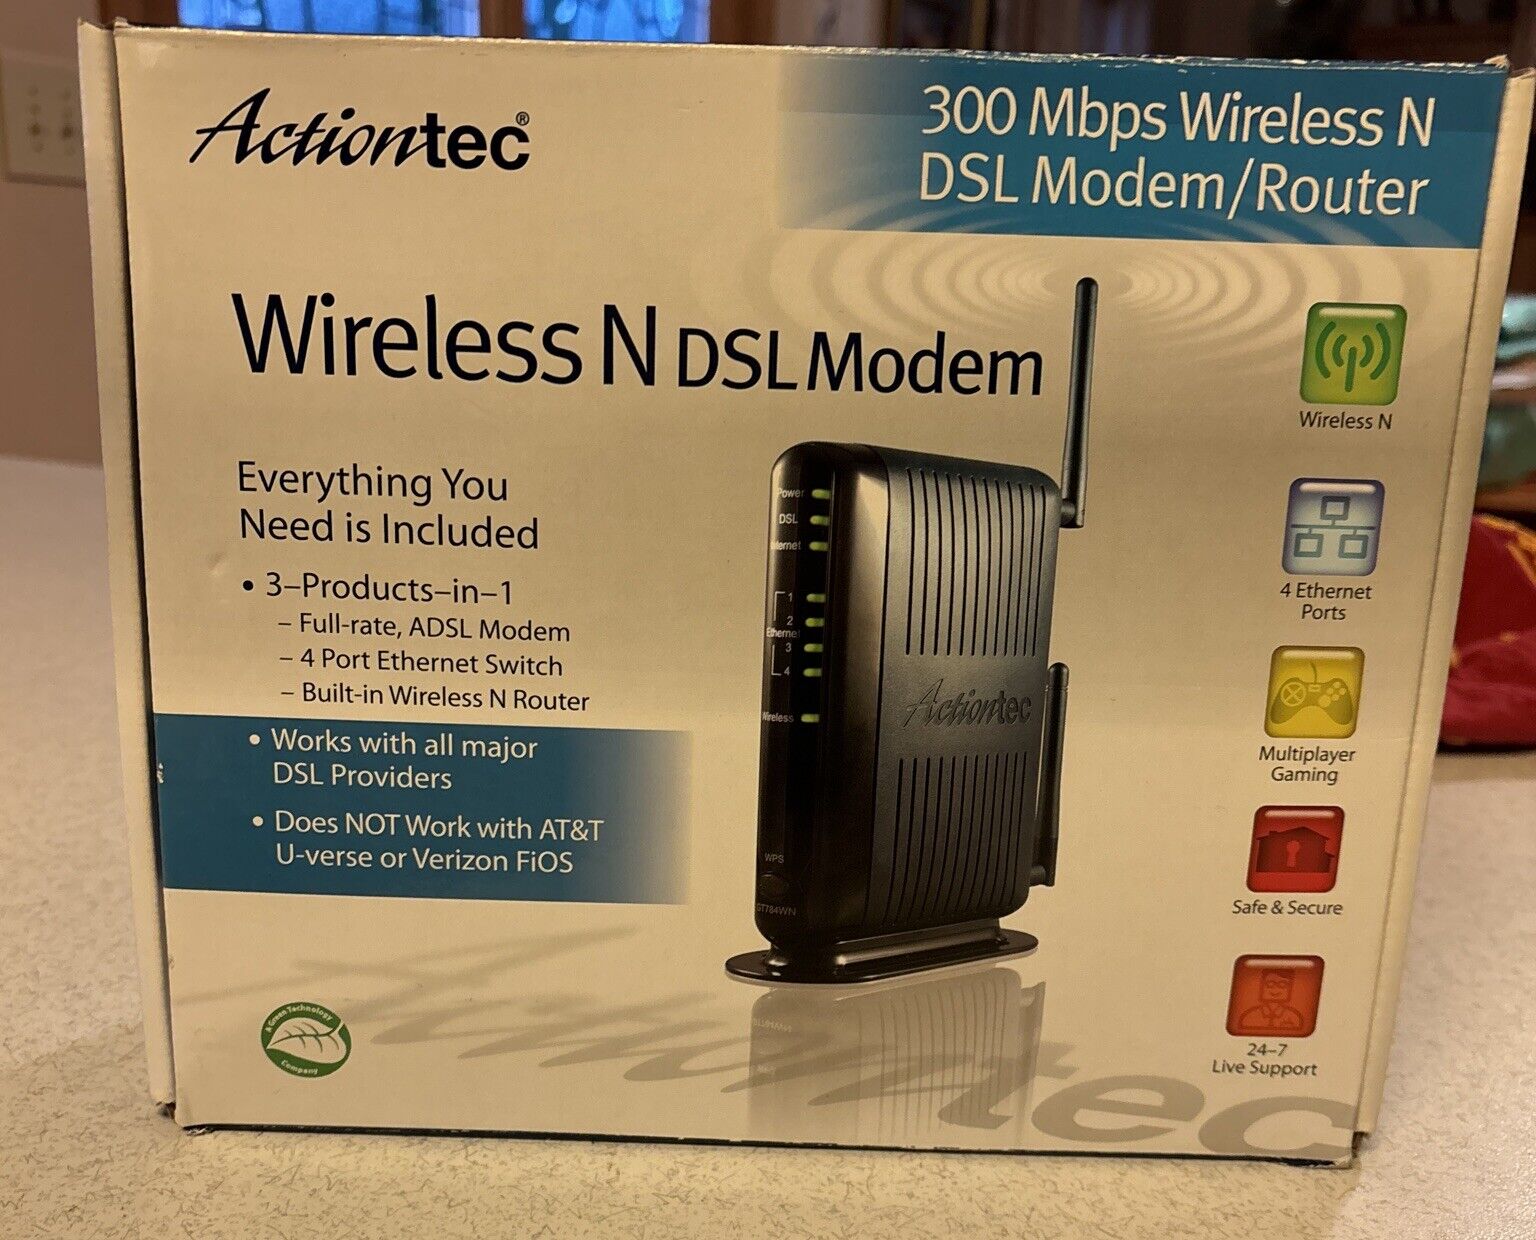 Actiontec 300 Mbps Wireless N DSL Modem/Route GT784WN-01 Used In Box Manual